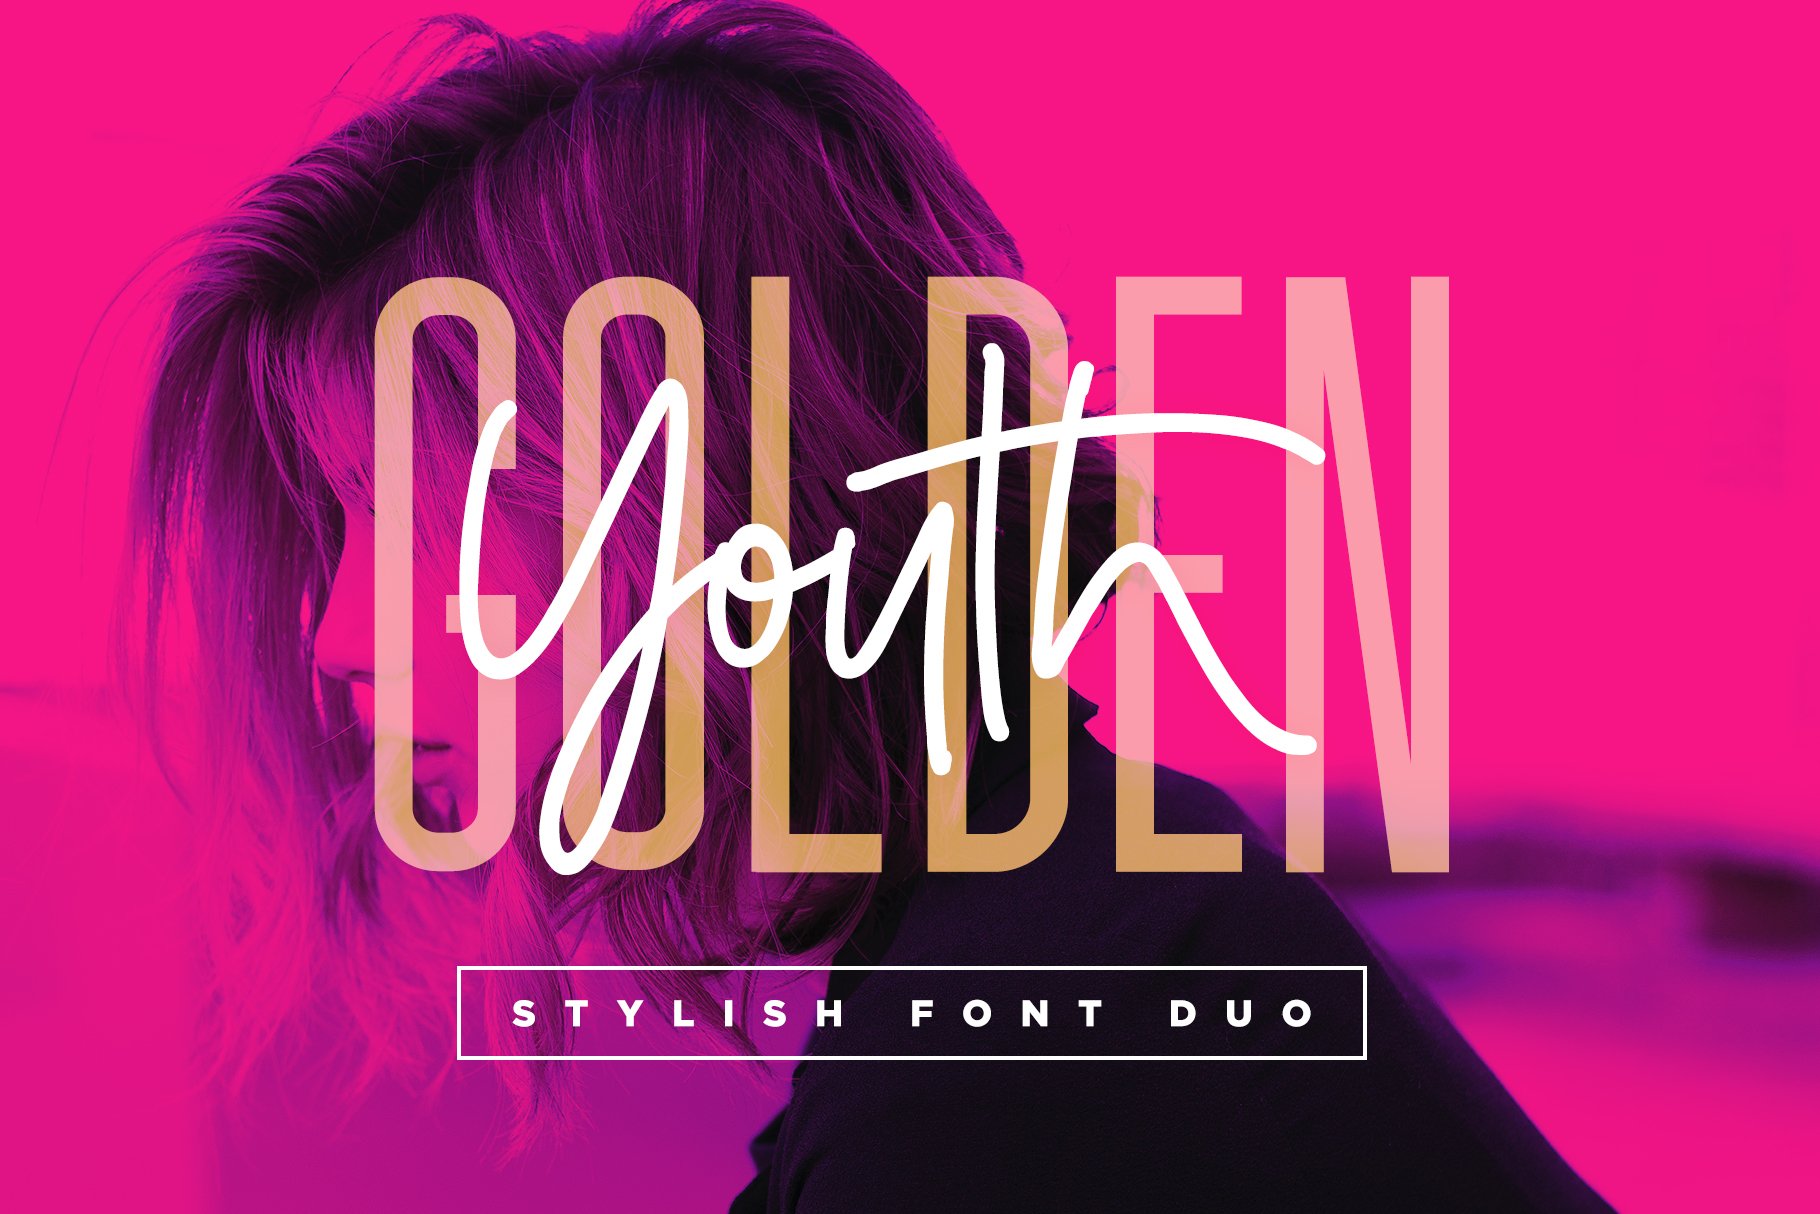 Golden Youth Font Duo cover image.